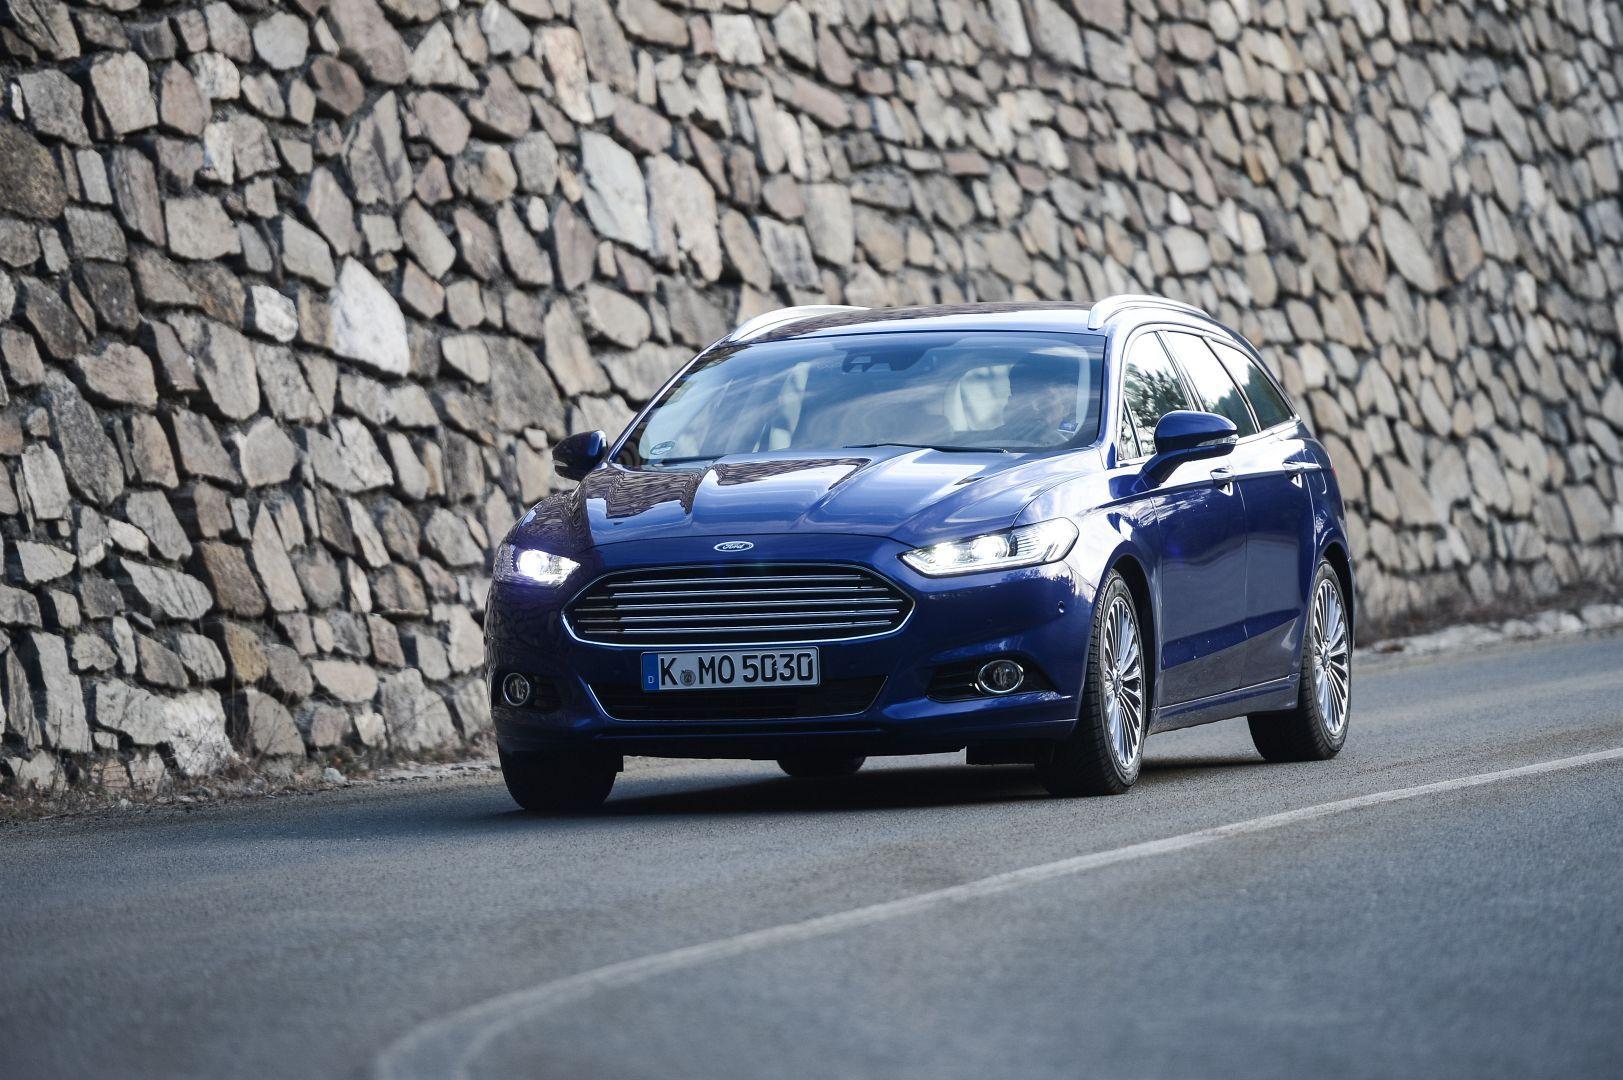 Your 2015 Ford Mondeo HD Wallpaper Are Served